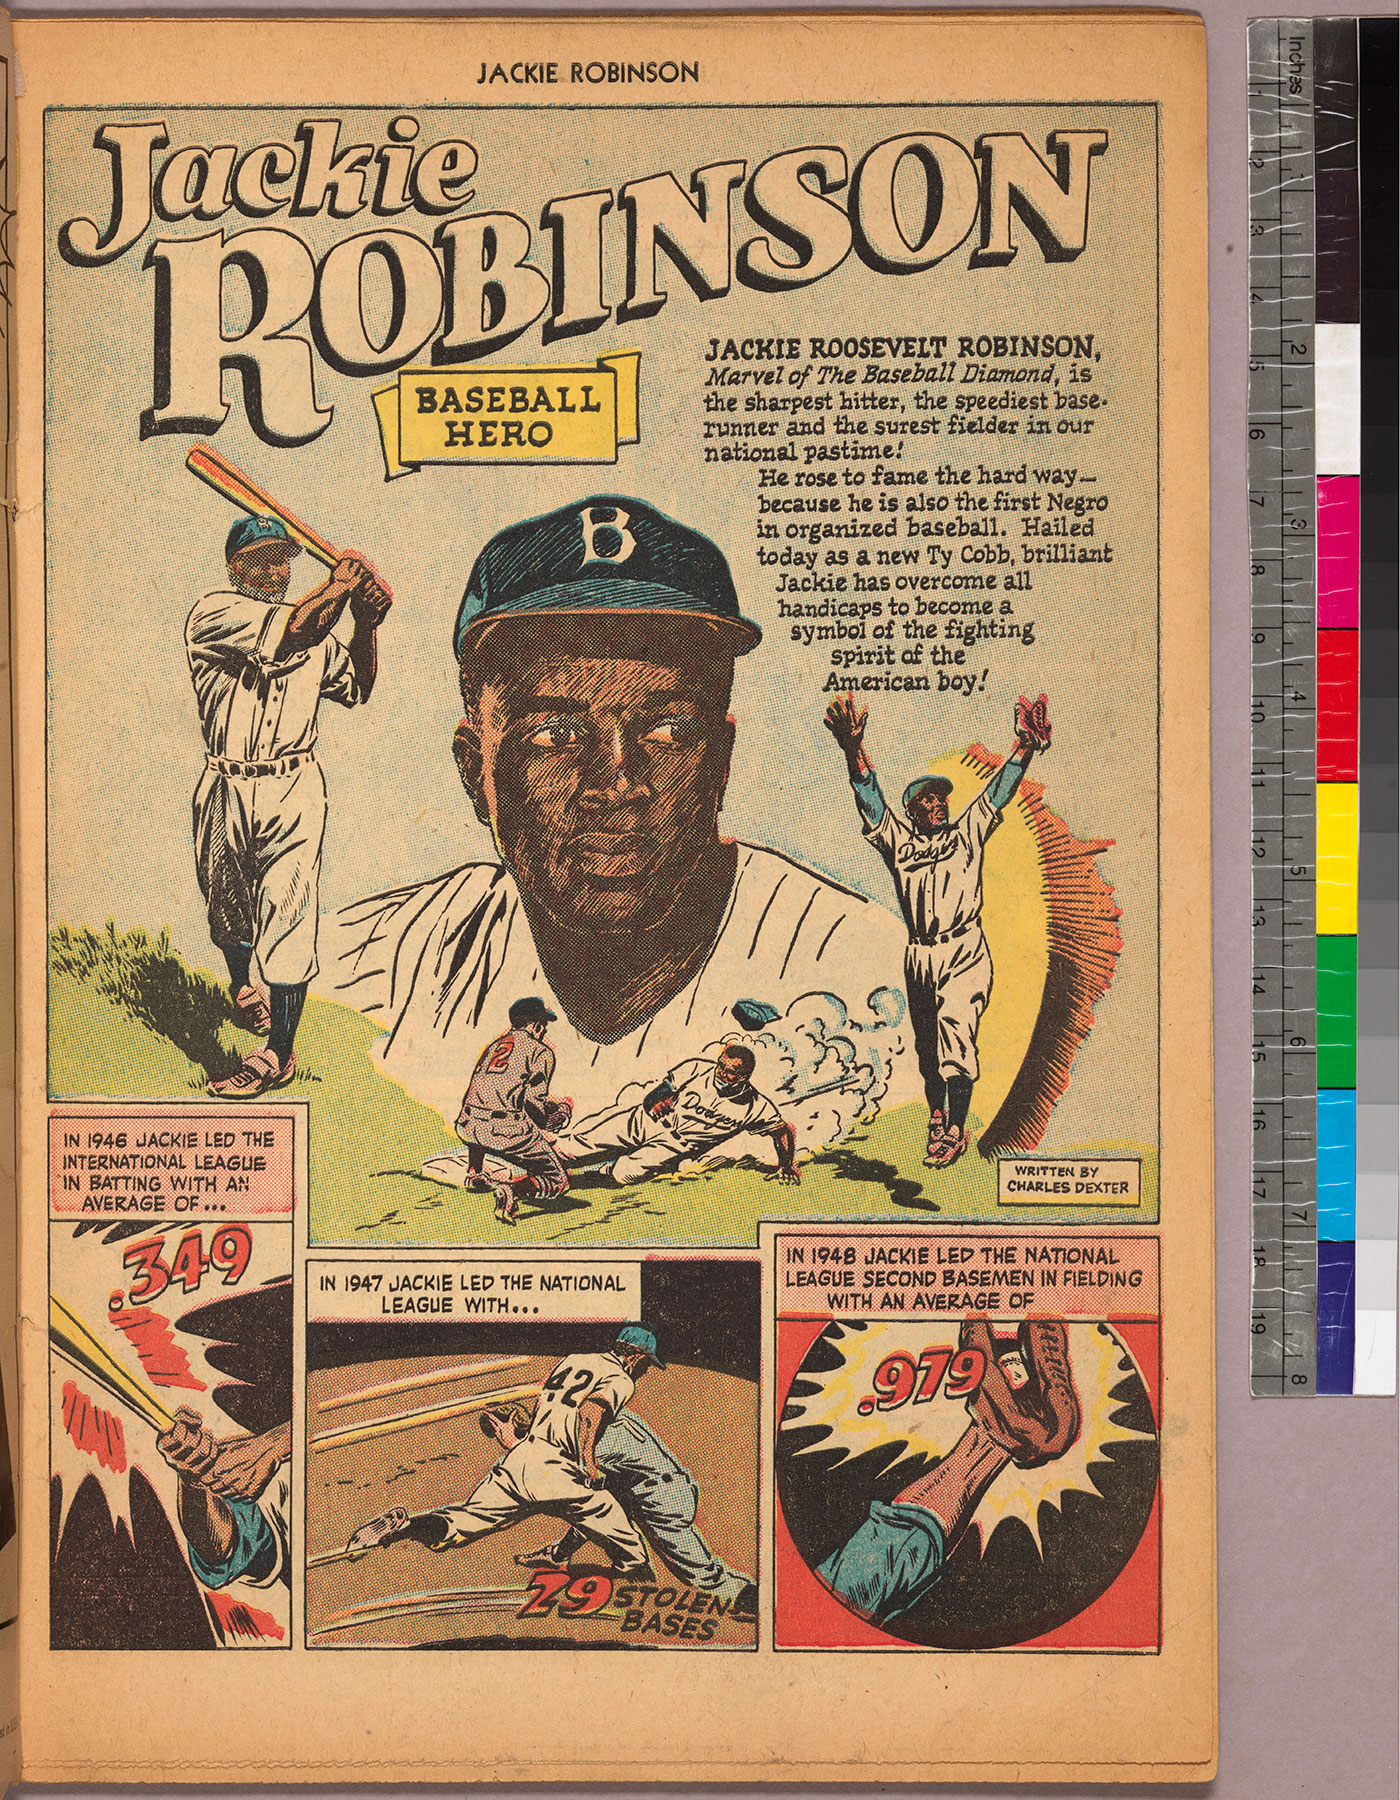 JACKIE ROBINSON (PART ONE) - A FIVE PAGE PREVIEW - Comic Book and